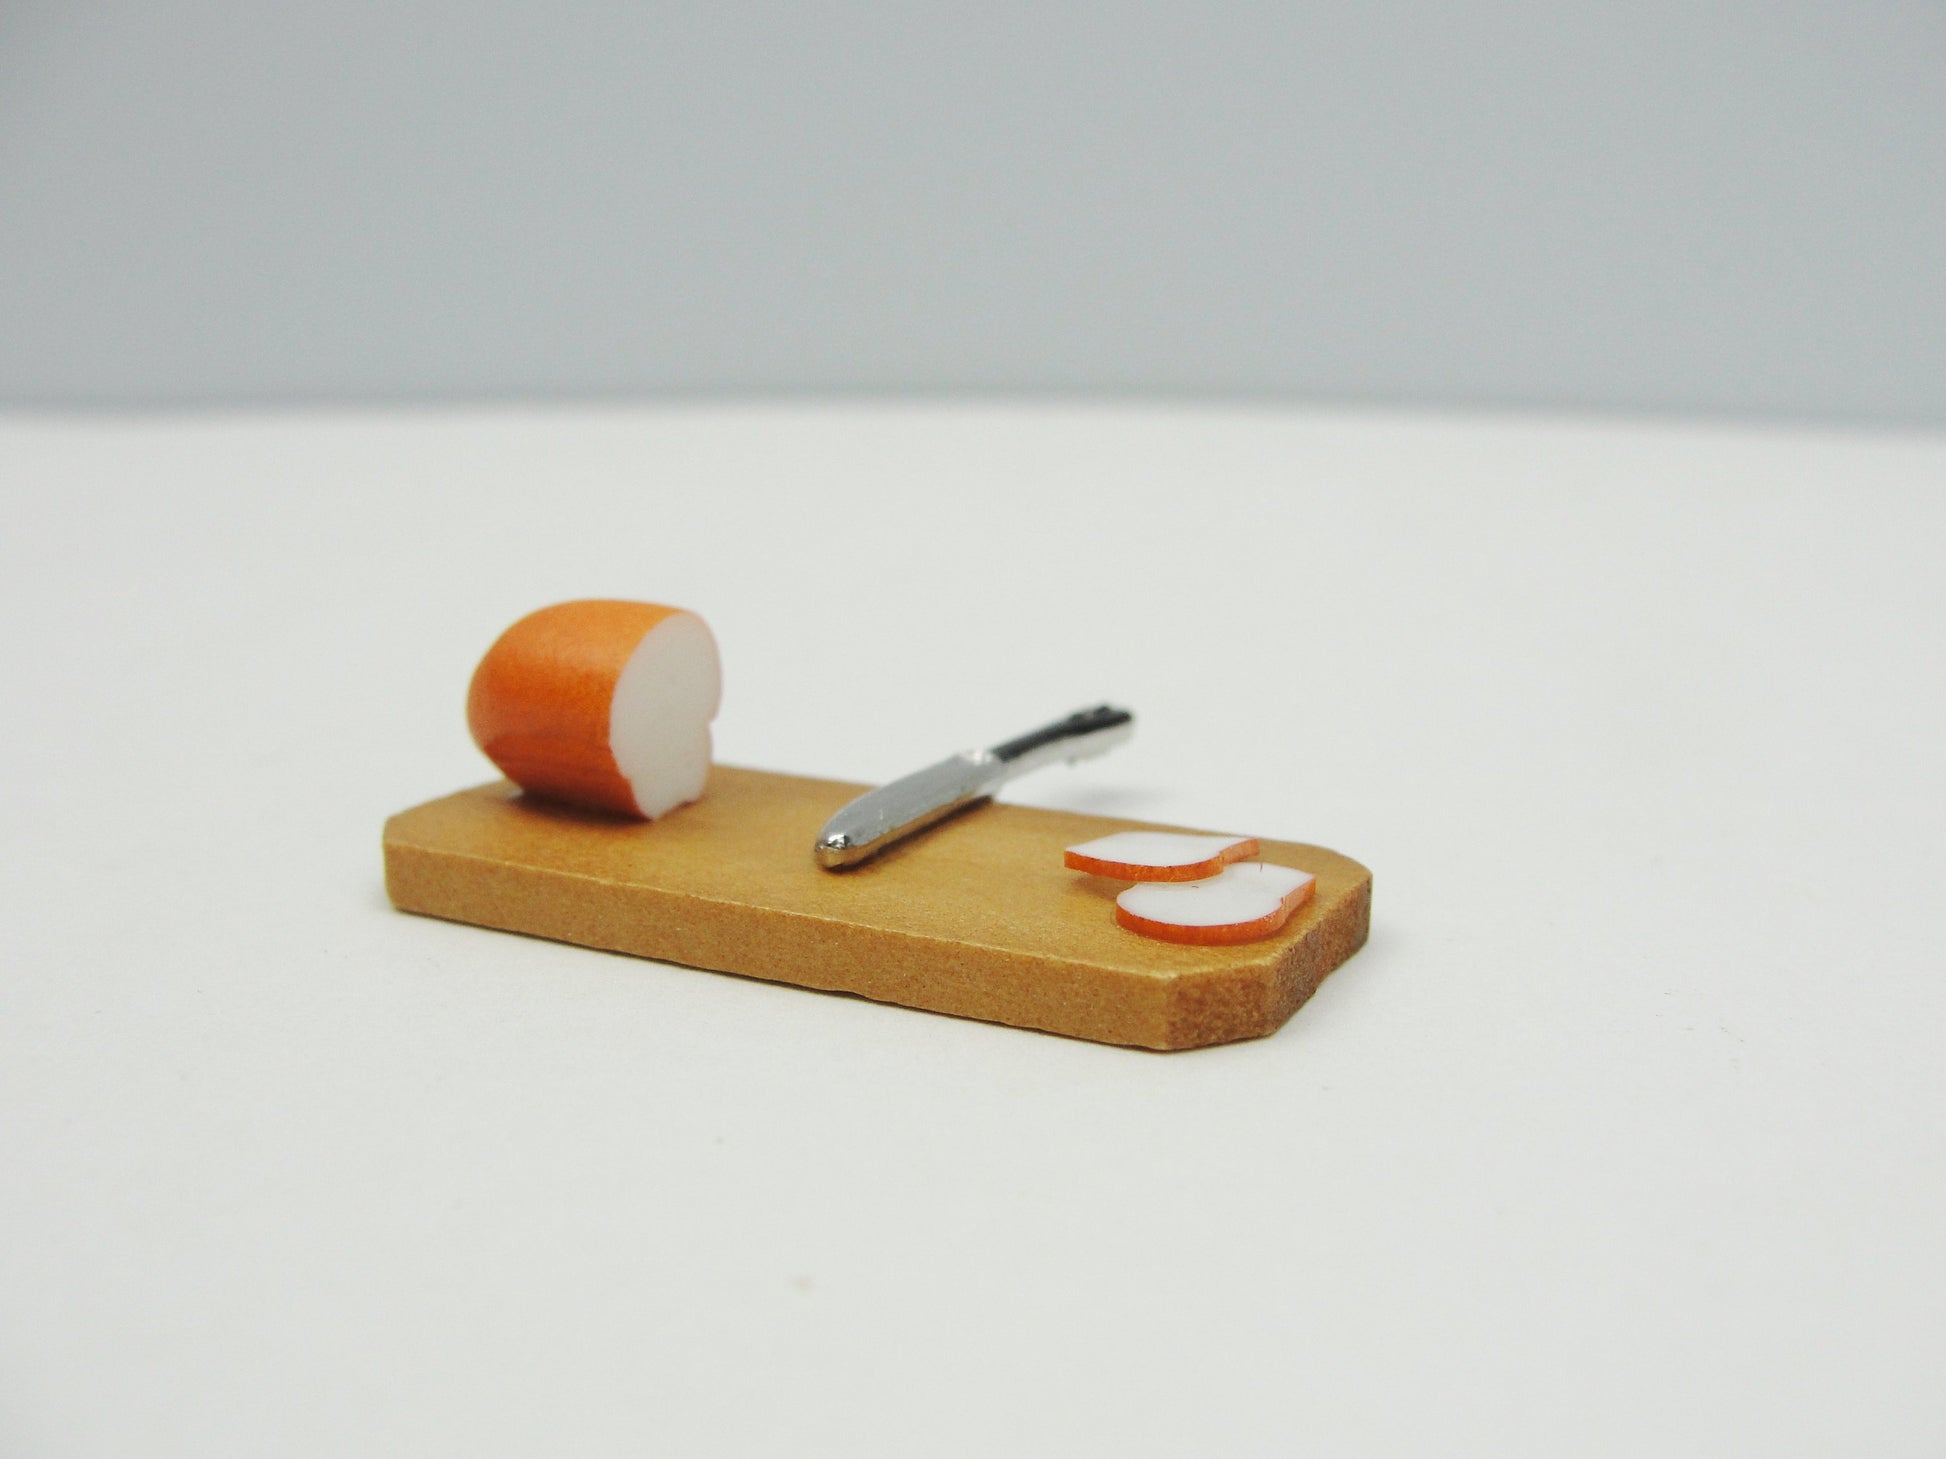 Dollhouse miniature bread and knife set - Miniatures - Craft Supply House